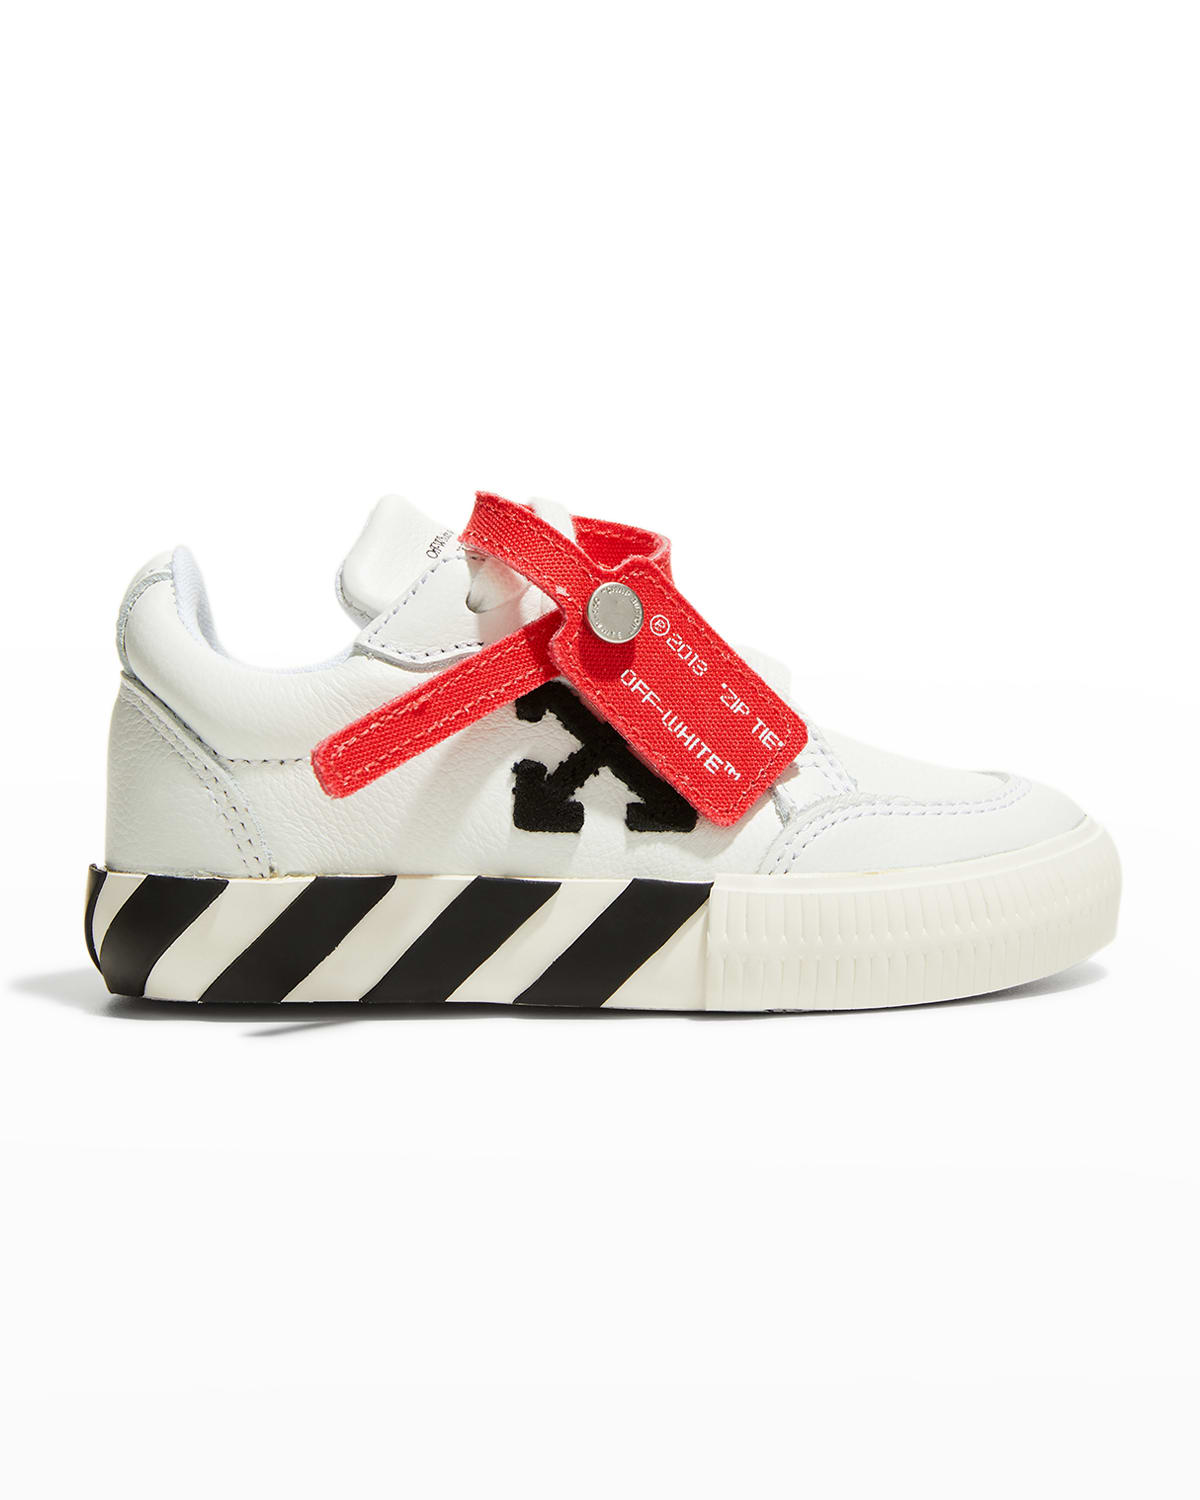 OFF-WHITE KID'S ARROW LEATHER LOW-TOP SNEAKERS, TODDLER/KIDS